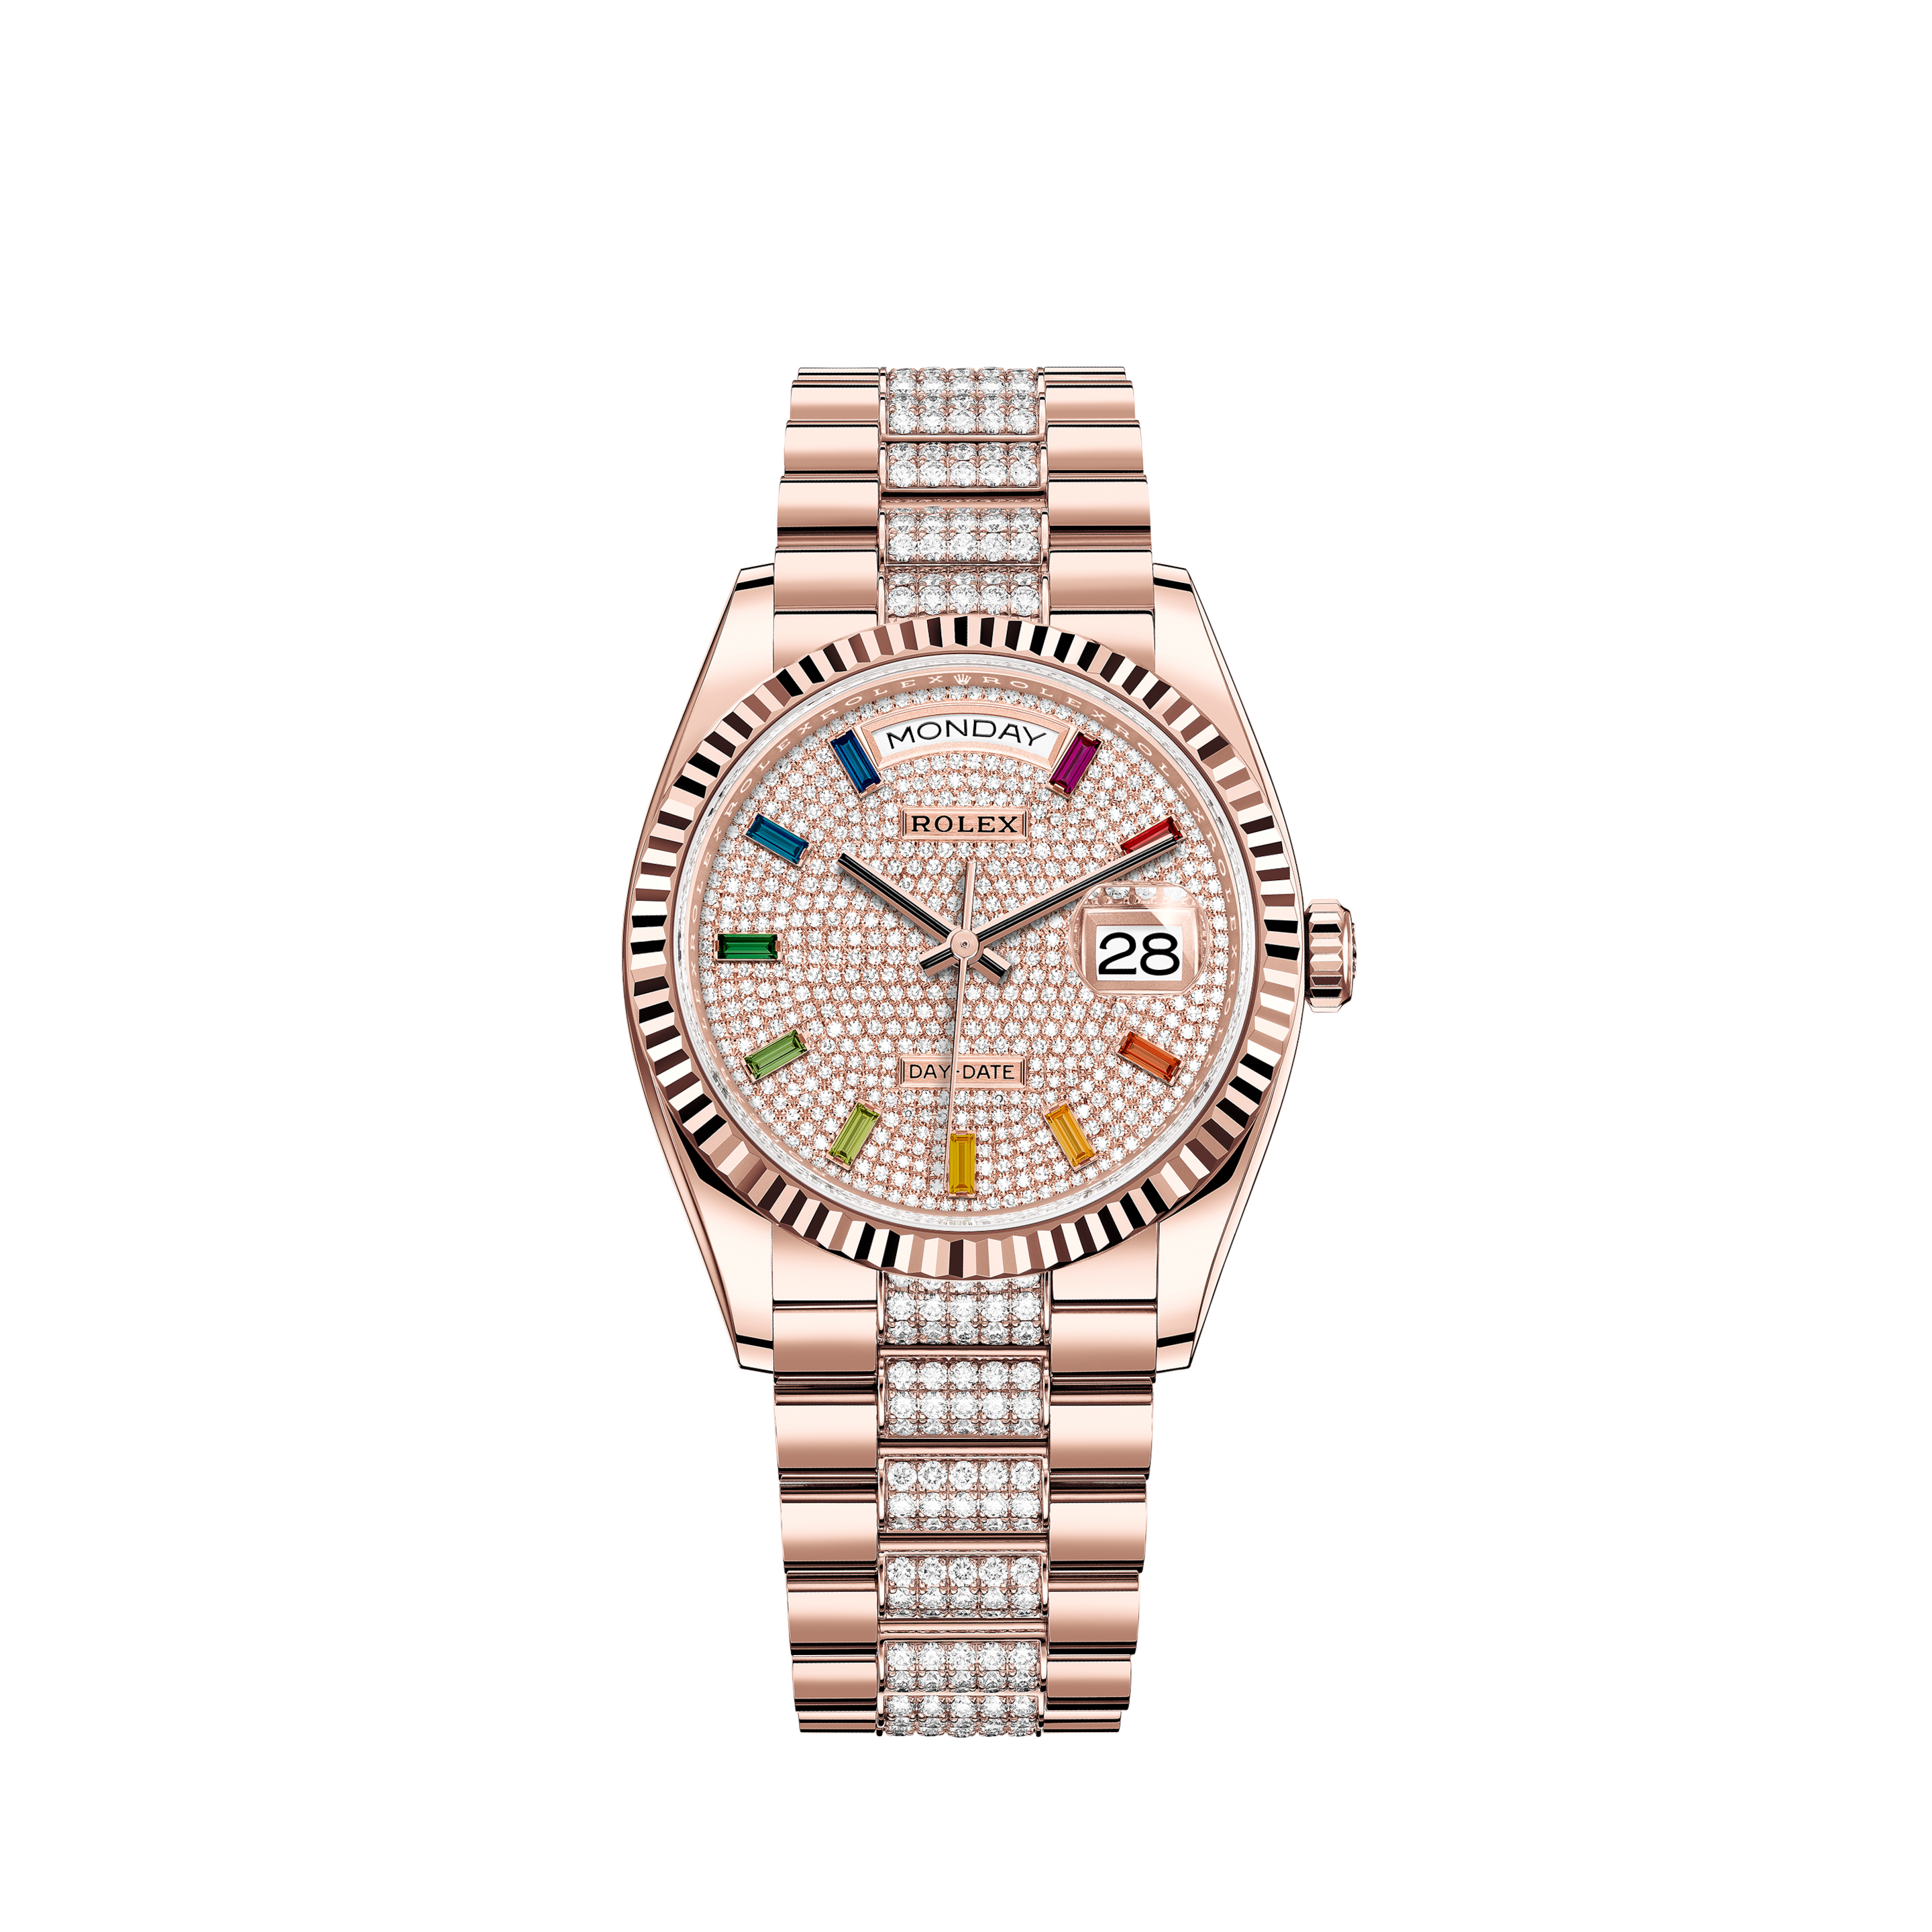 Rolex Women's Rolex 31mm Datejust Two Tone Jubilee White MOP Mother of Pearl Dial Diamond Accen Bezel + Lugs + Emerald 68273Rolex Women's Rolex 31mm Datejust Two Tone Jubilee White MOP Mother of Pearl Dial Diamond Accen Bezel + Lugs + Rubies